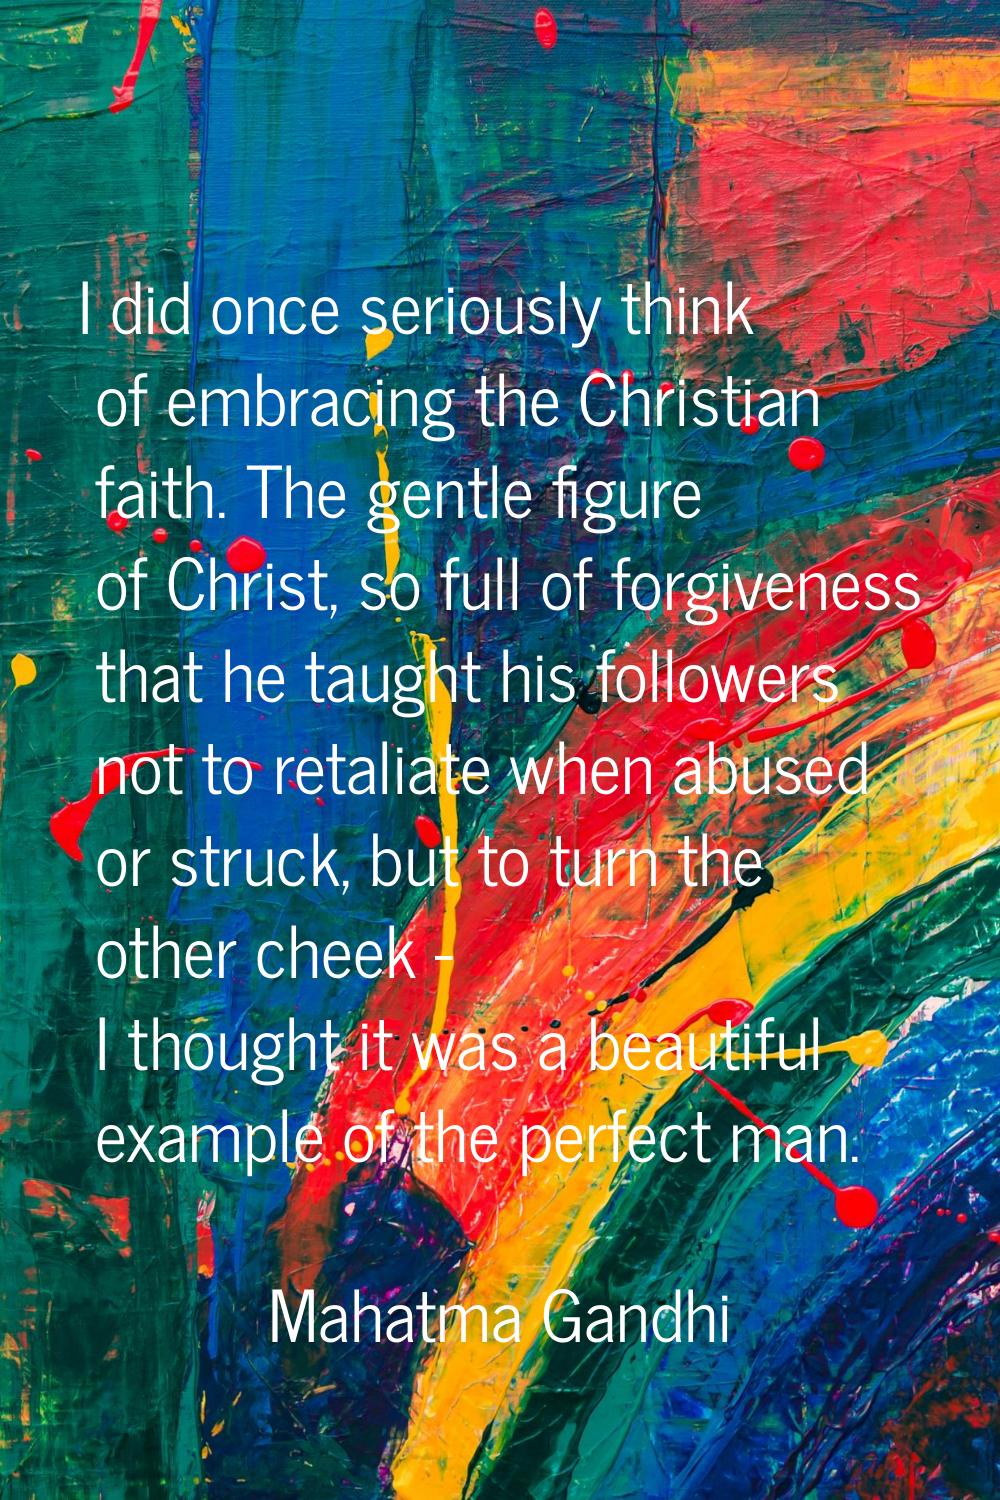 I did once seriously think of embracing the Christian faith. The gentle figure of Christ, so full o